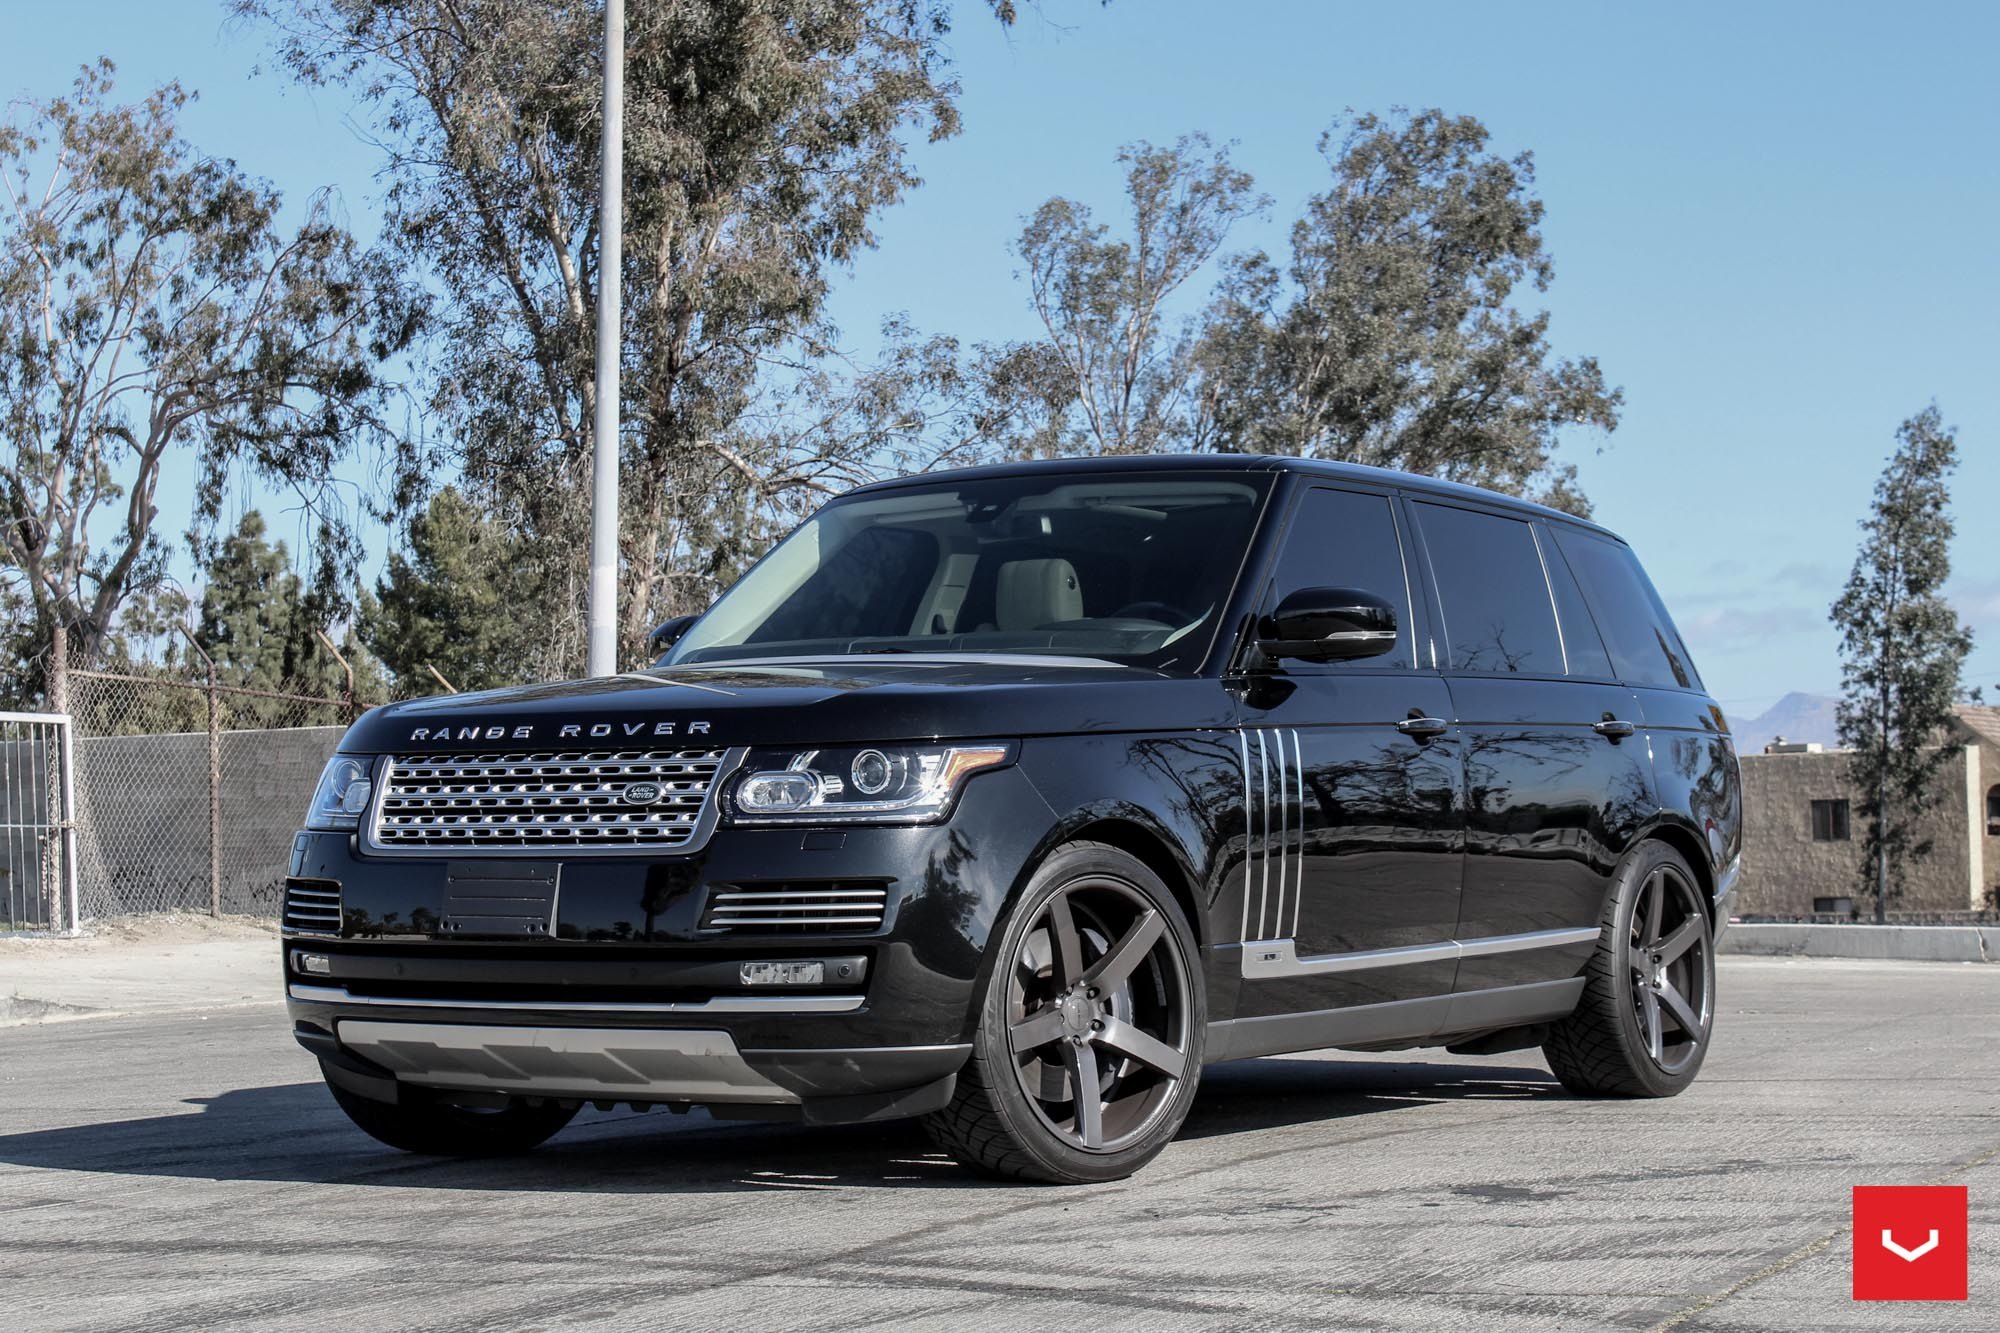 Gloss Black Land Rover Range Rover with Aftermarket Headlights - Photo by Vossen